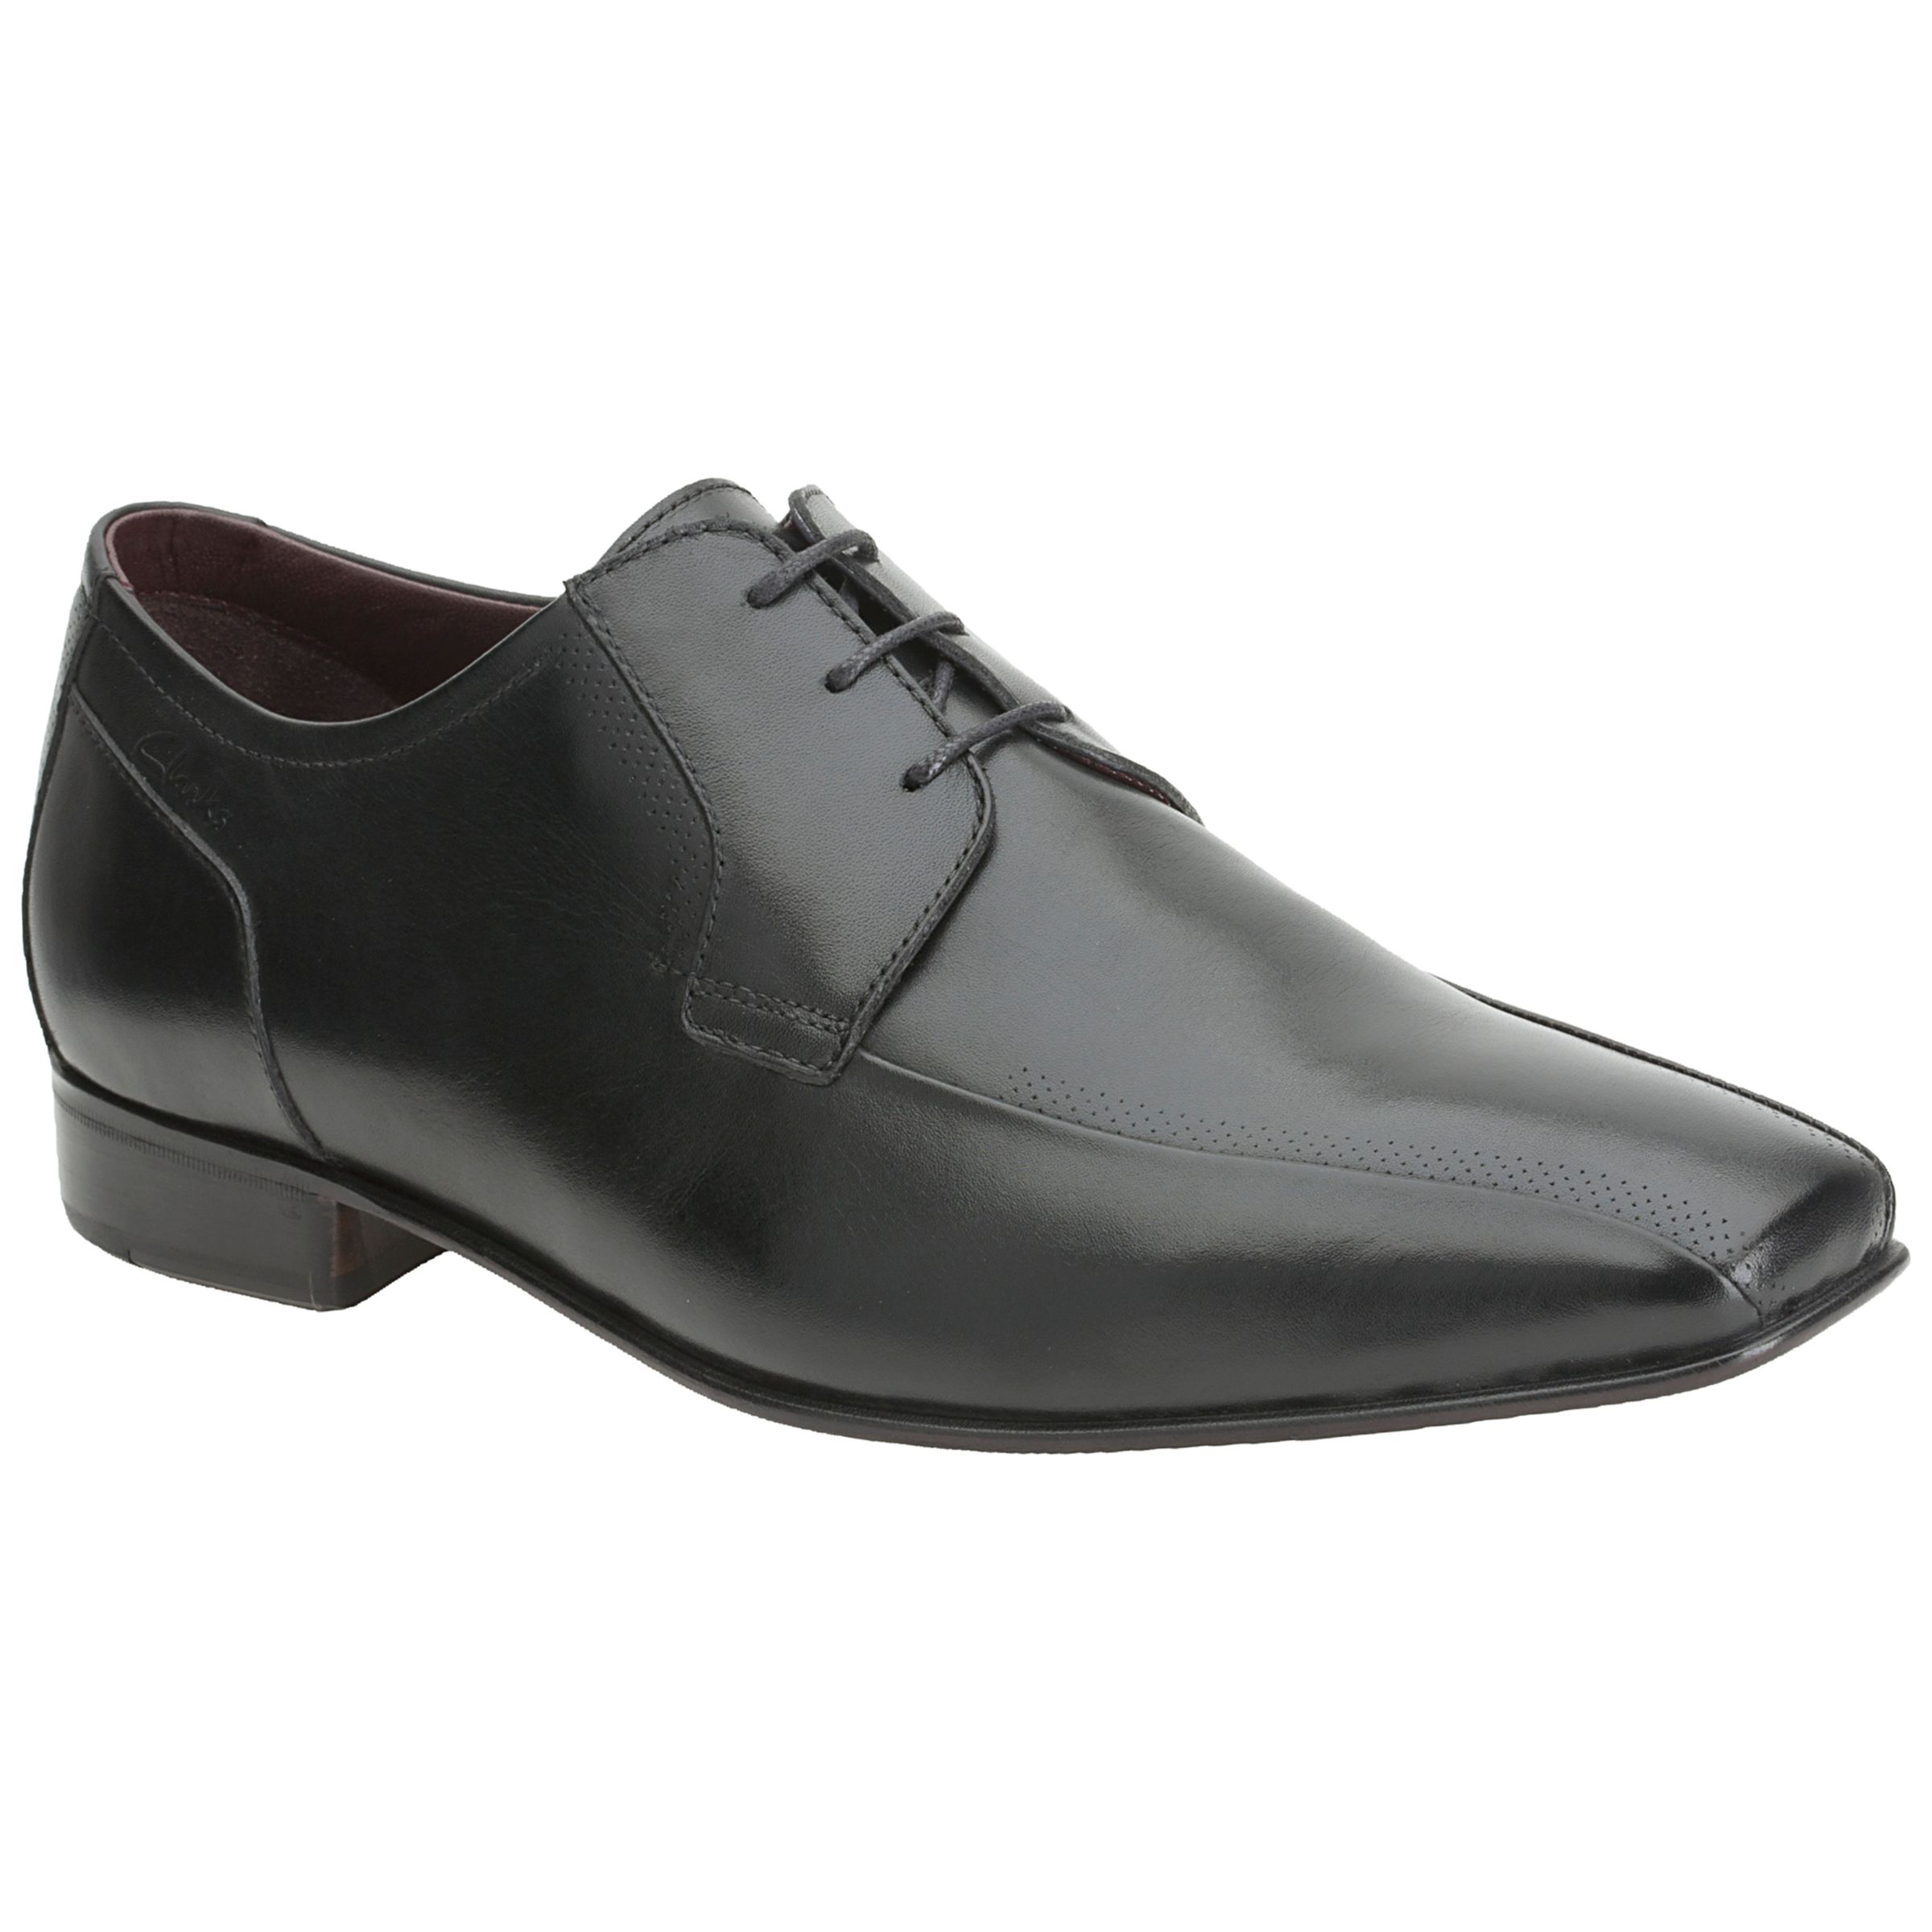 clarks black leather chilton work shoes